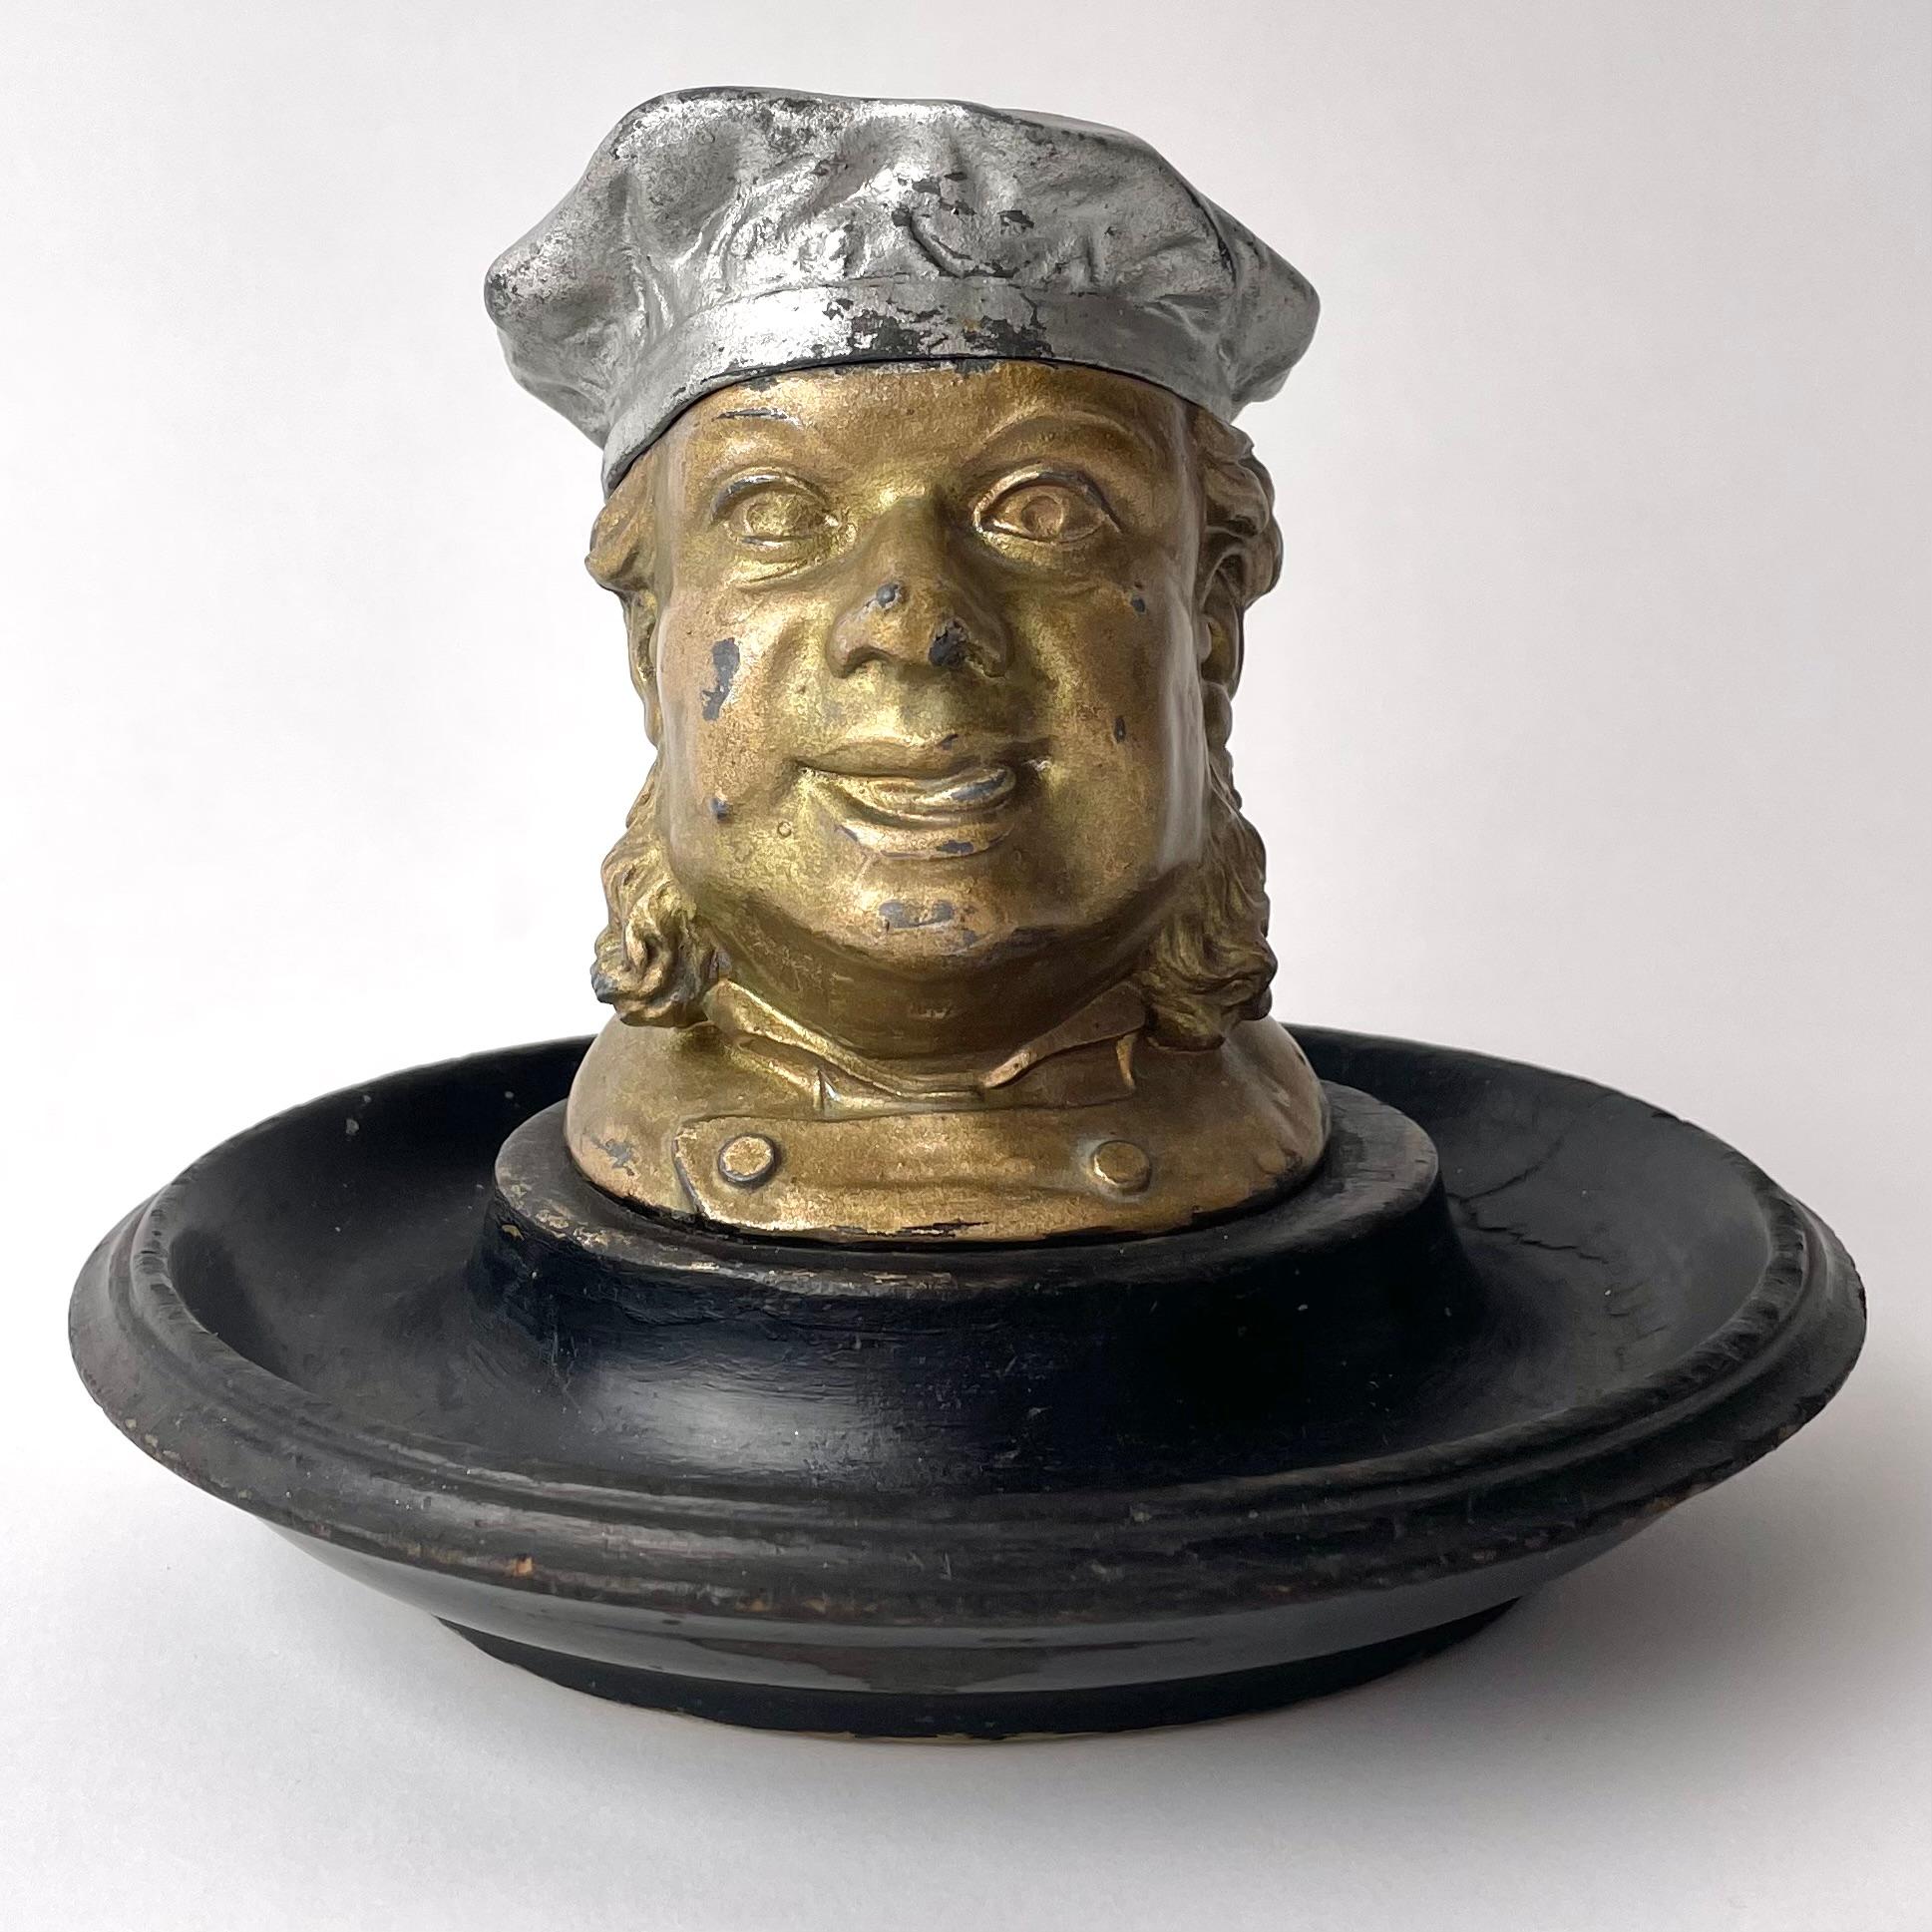 Charming Headshaped Ink Stand, Gilt White Metal Patinated Wood 19th C. England In Good Condition For Sale In Knivsta, SE